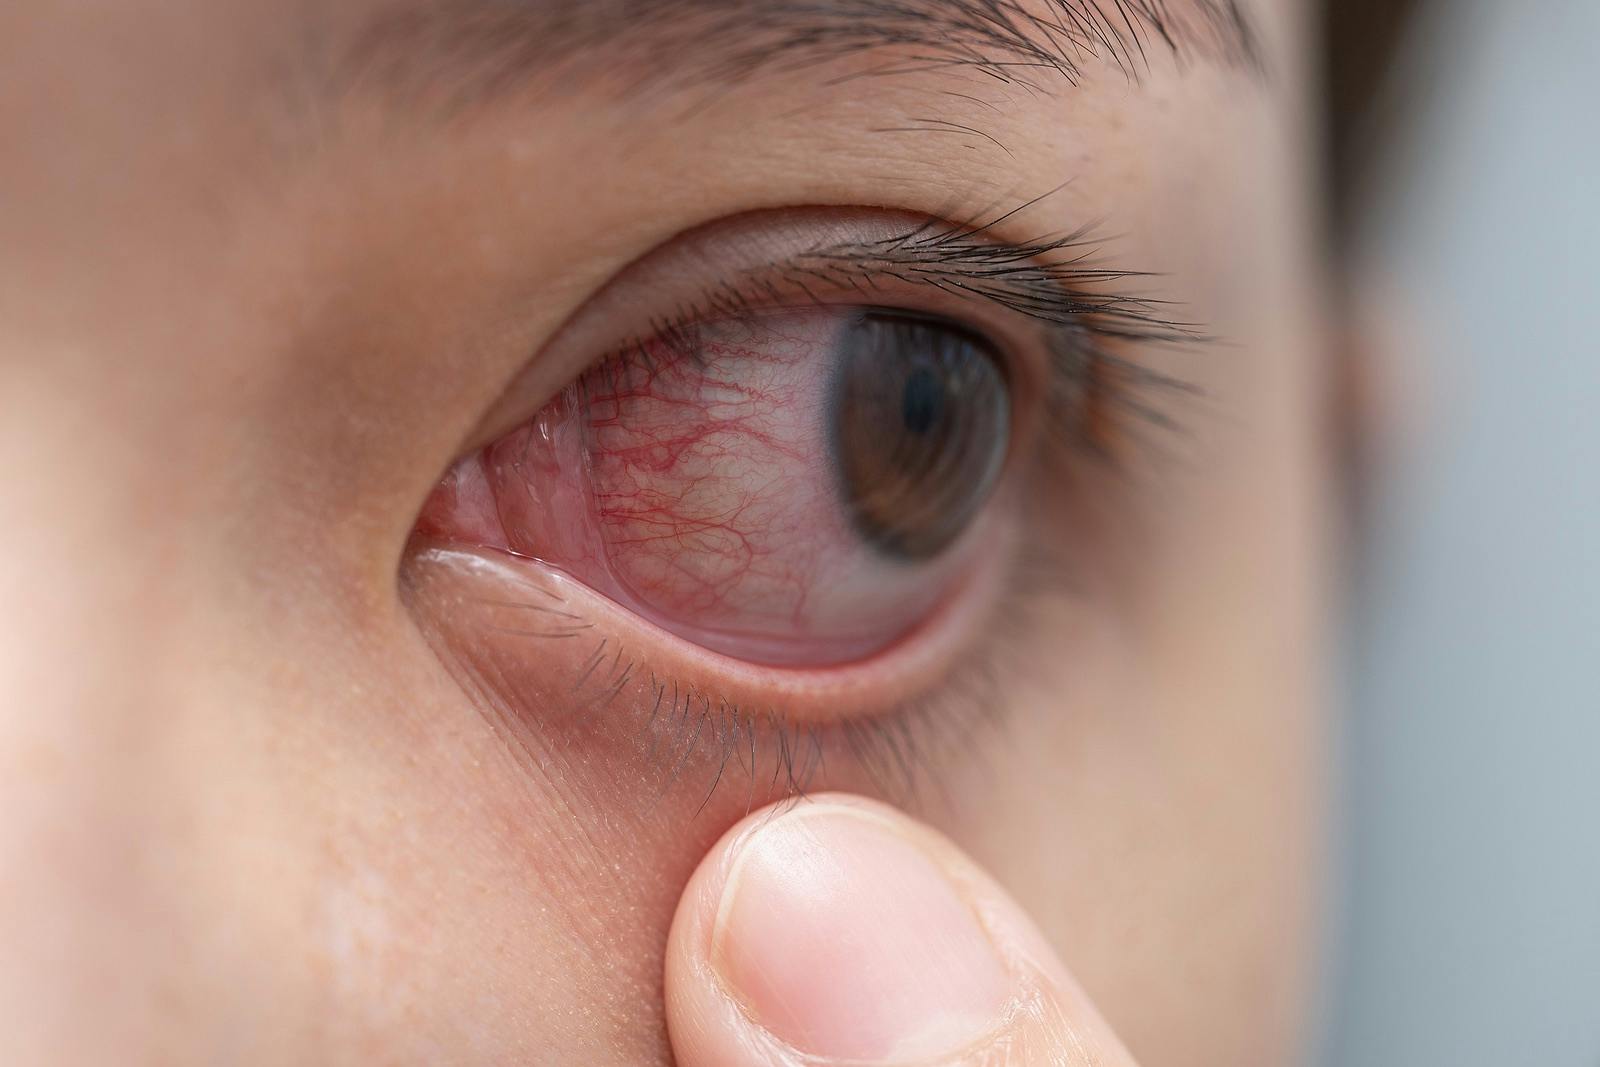 Closeup of irritated or infected red bloodshot eye &#8211; conjunctivitis. Red eye of woman, conjunctivitis eye, allergy or after cry.
